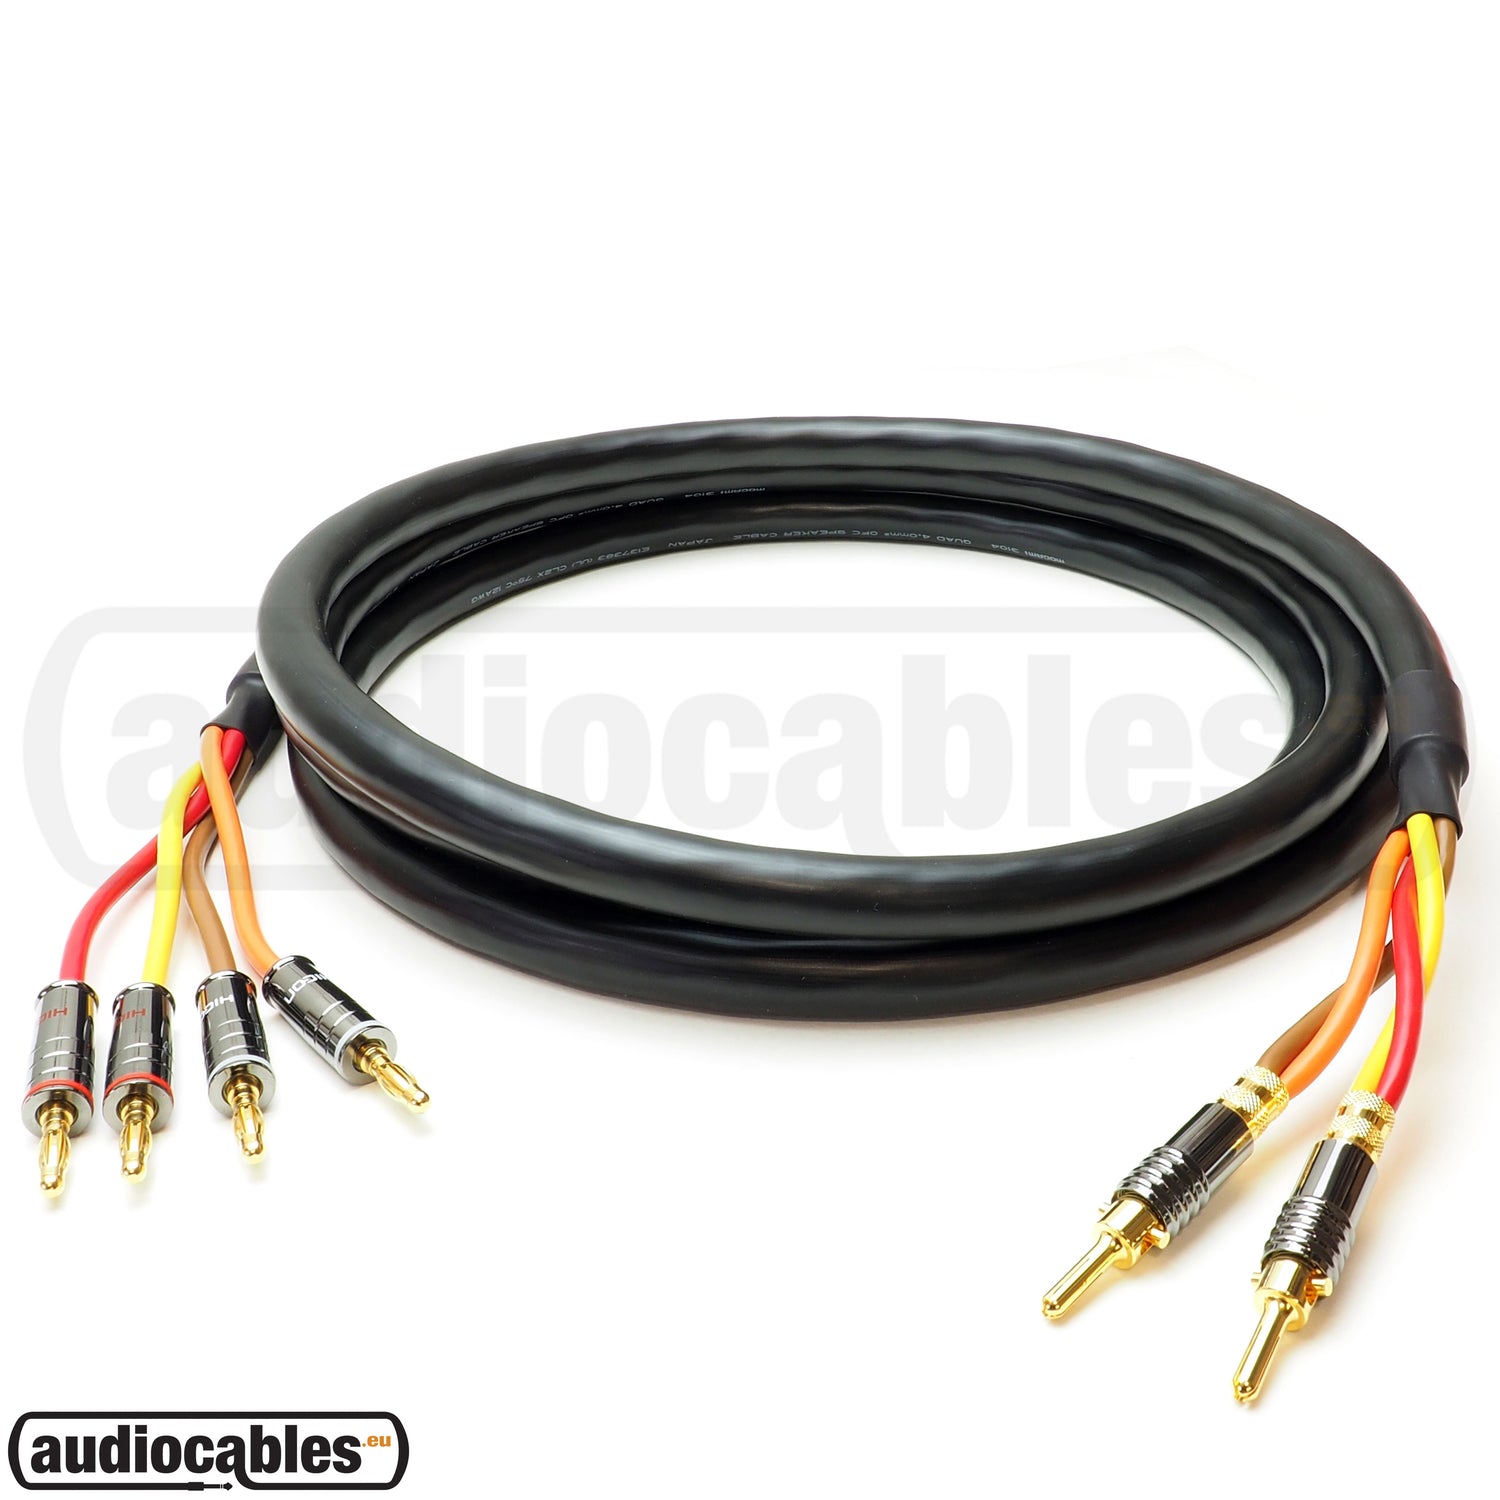 008. Speaker Cables